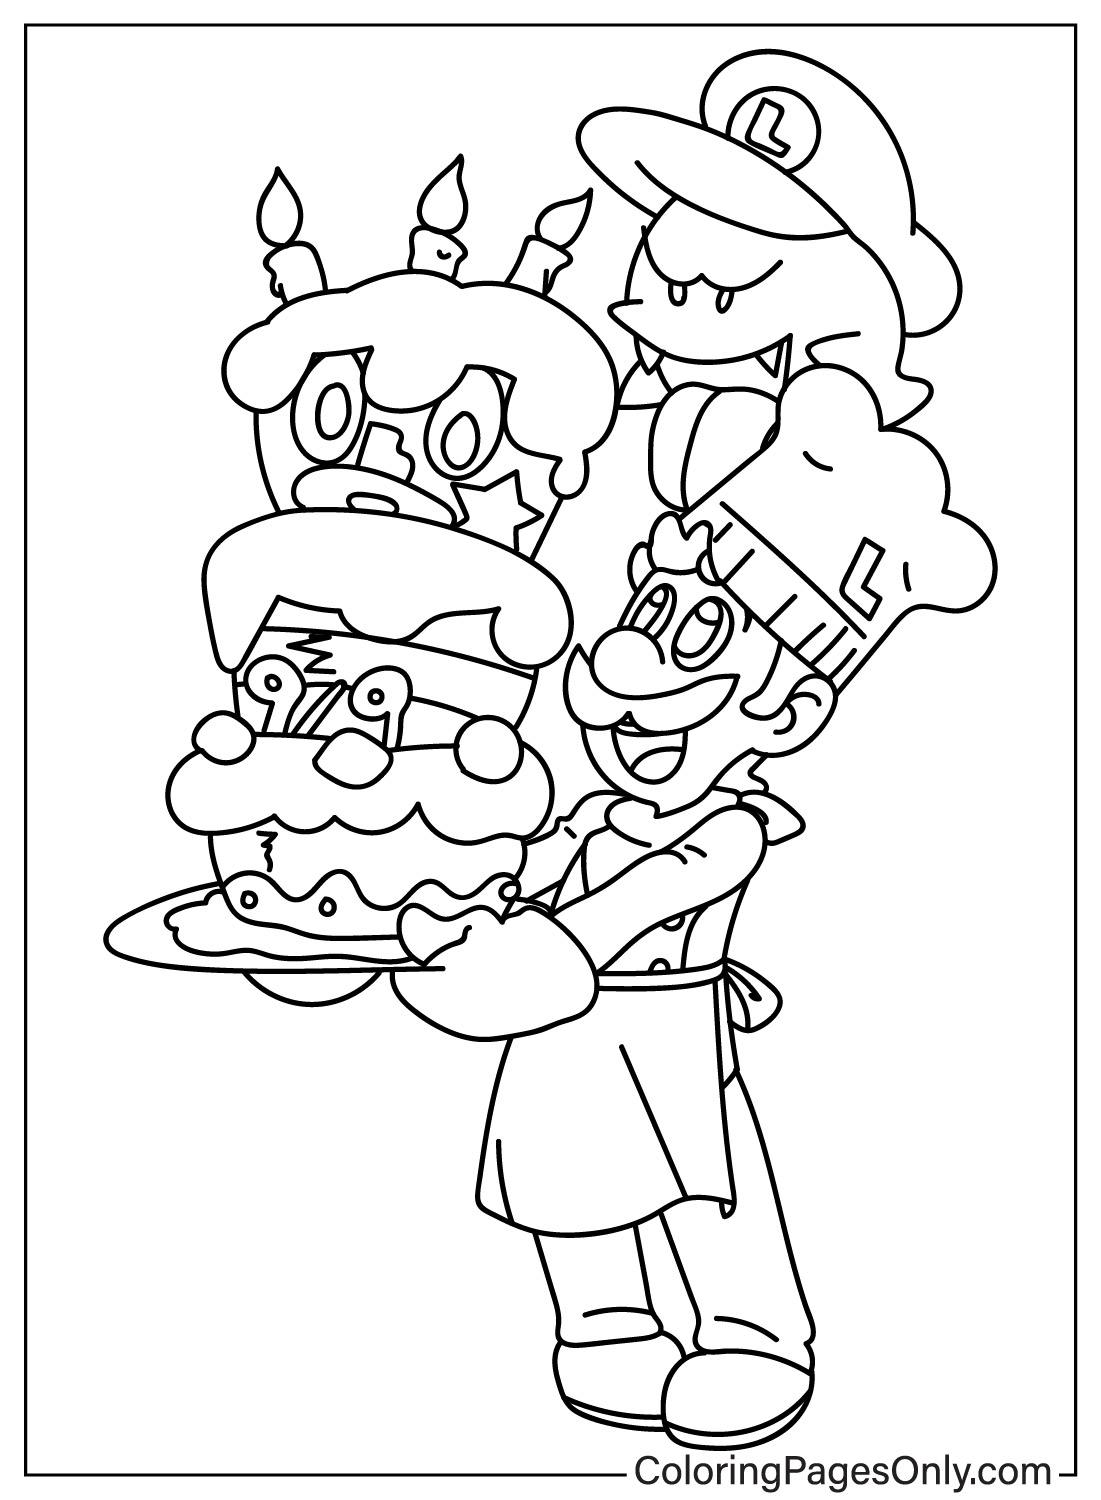 Luigi Coloring Pages to Printable